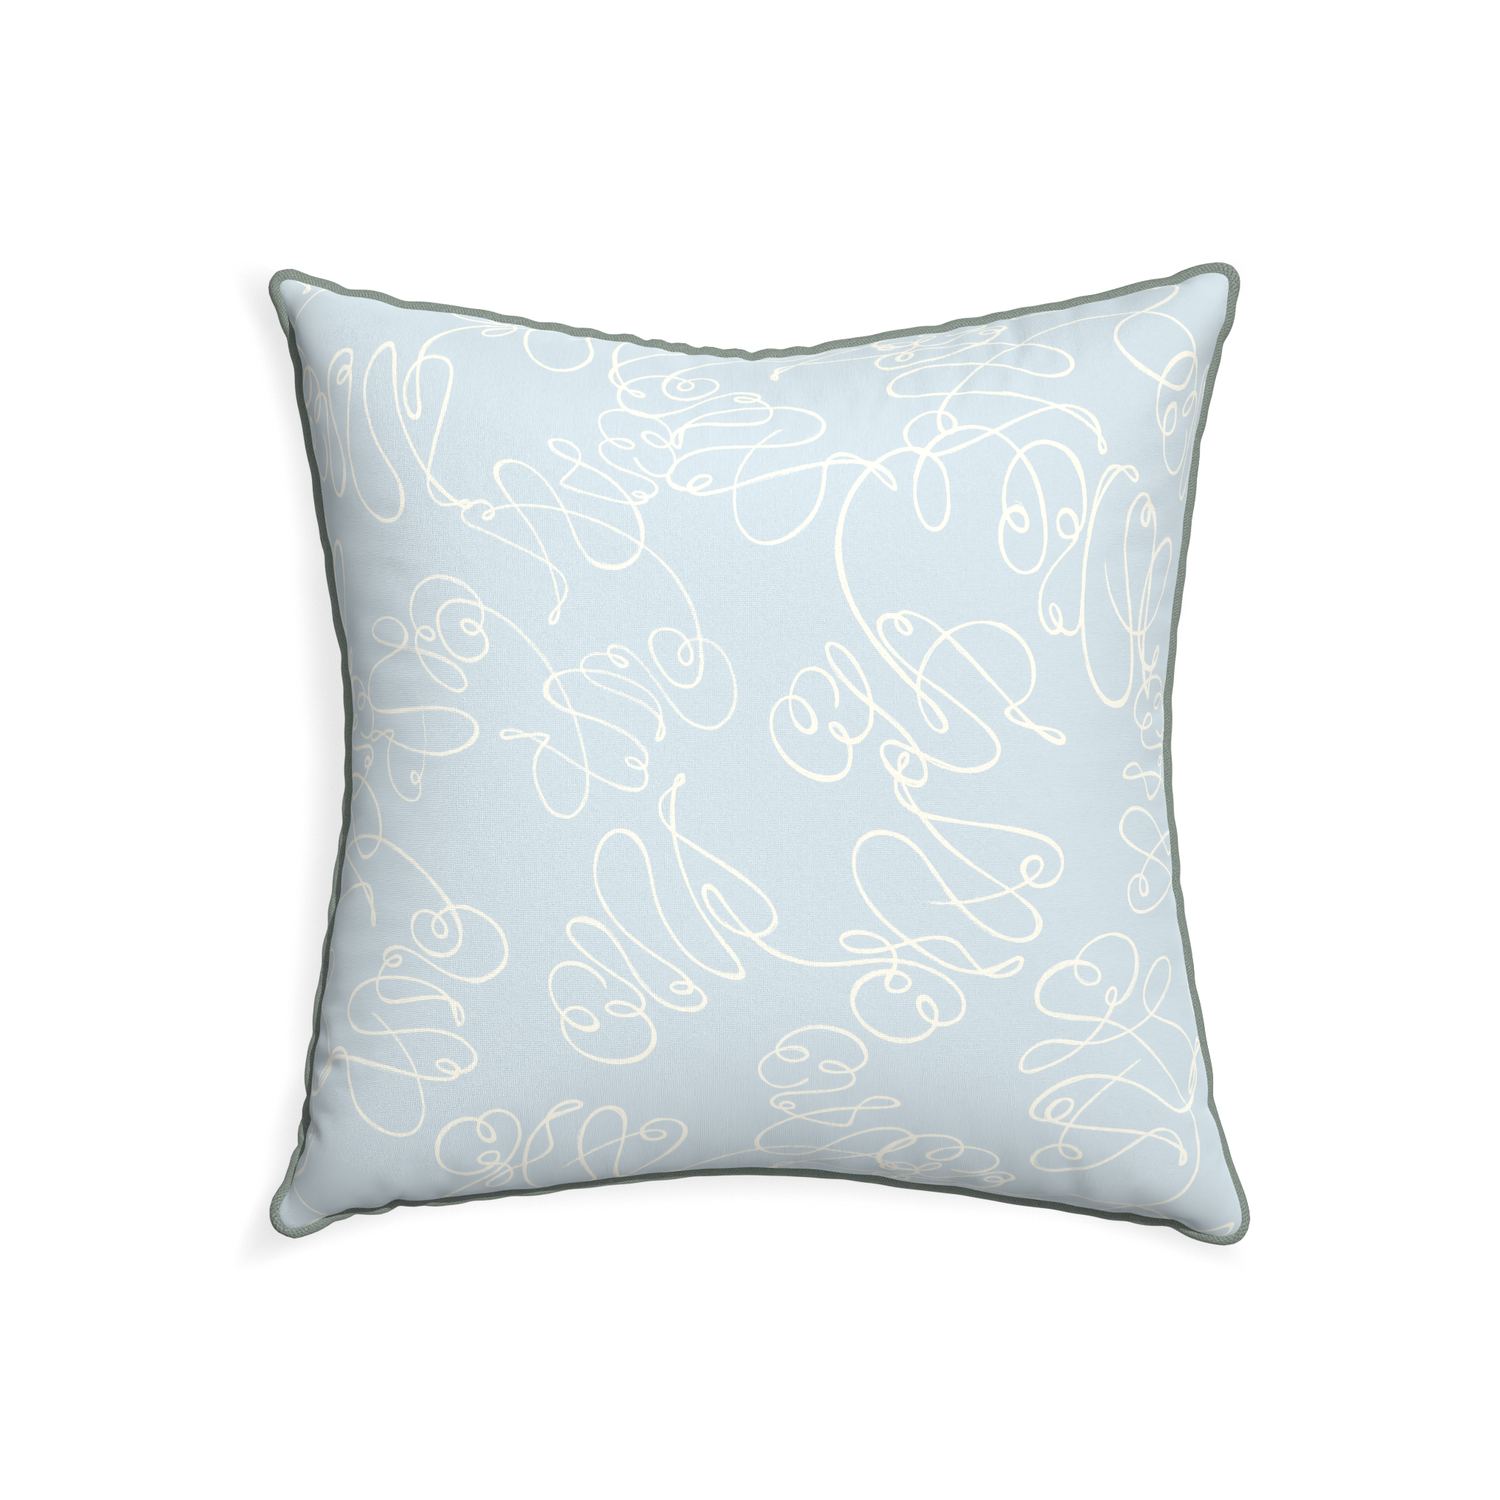 22-square mirabella custom powder blue abstractpillow with sage piping on white background